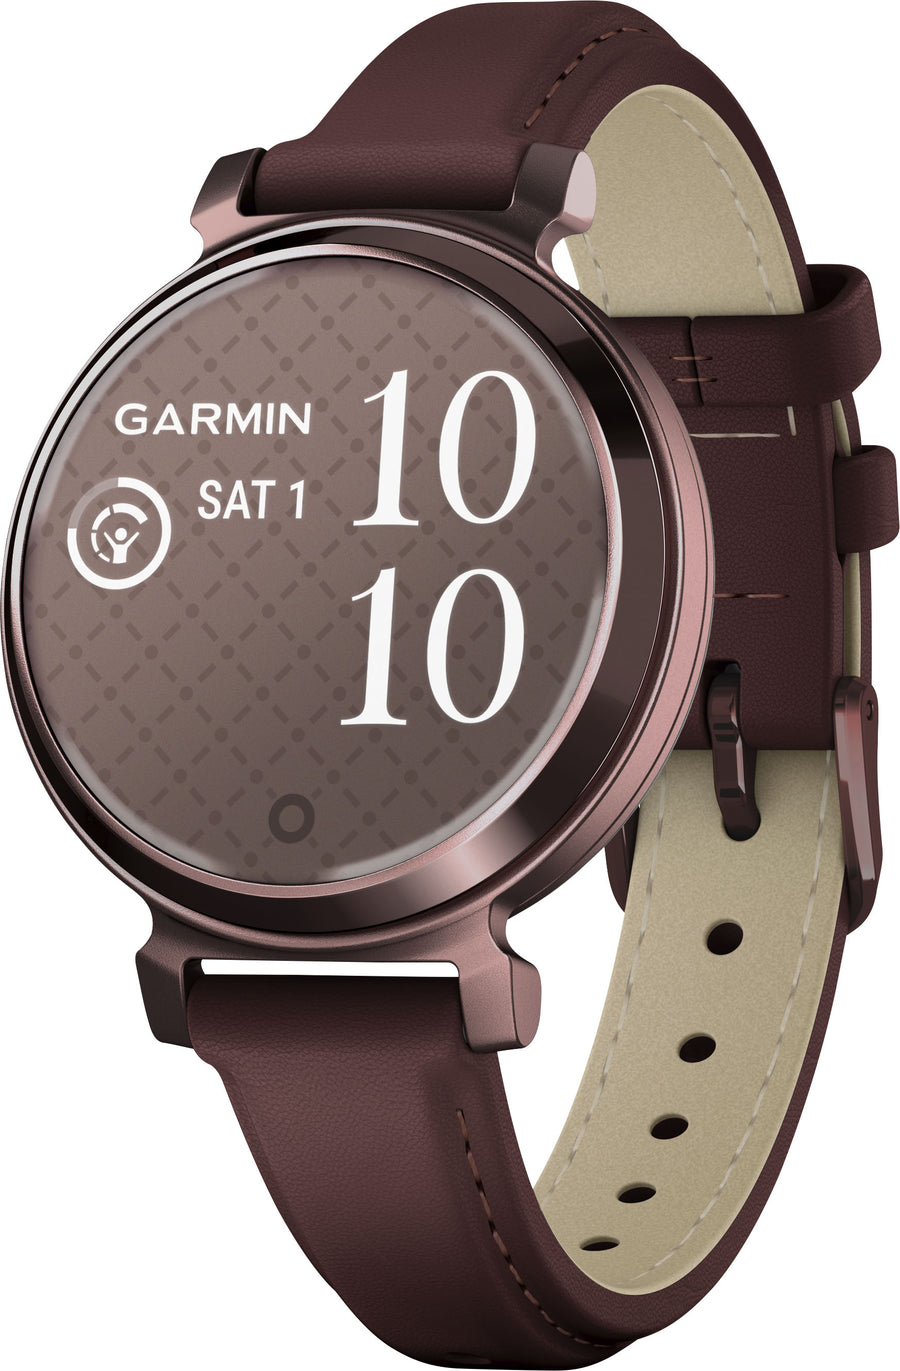 Garmin - Lily 2 Classic Smartwatch 34 mm Anodized Aluminum - Dark Bronze with Mulberry Leather Band_0